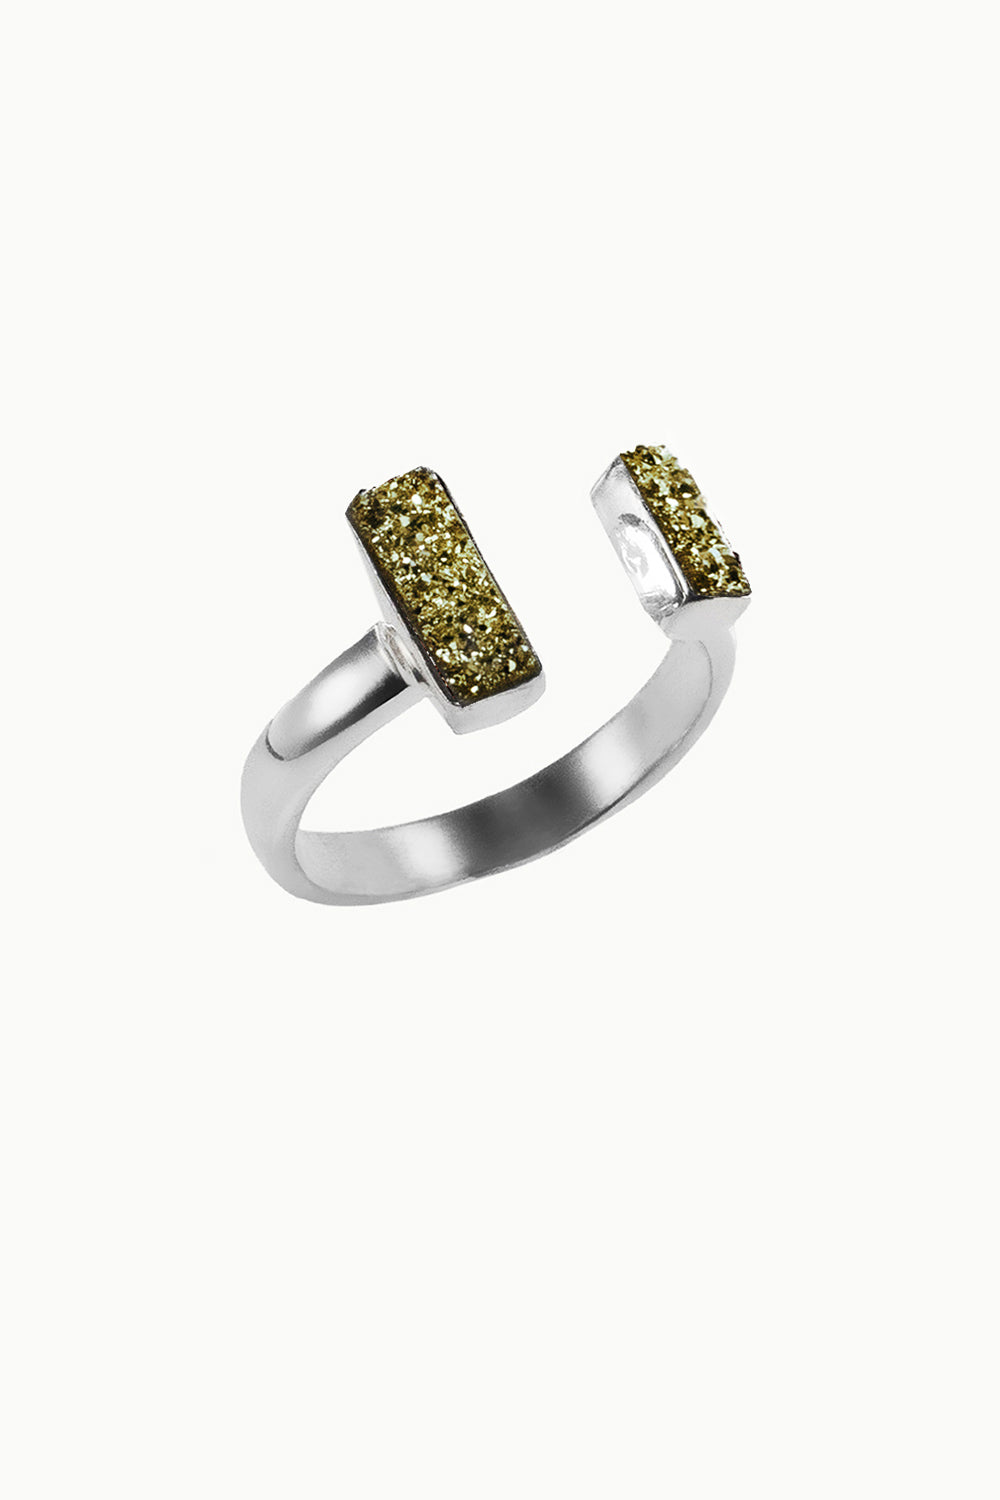 Sivalya Gold Druzy Adjustable Pinky Ring in Sterling Silver